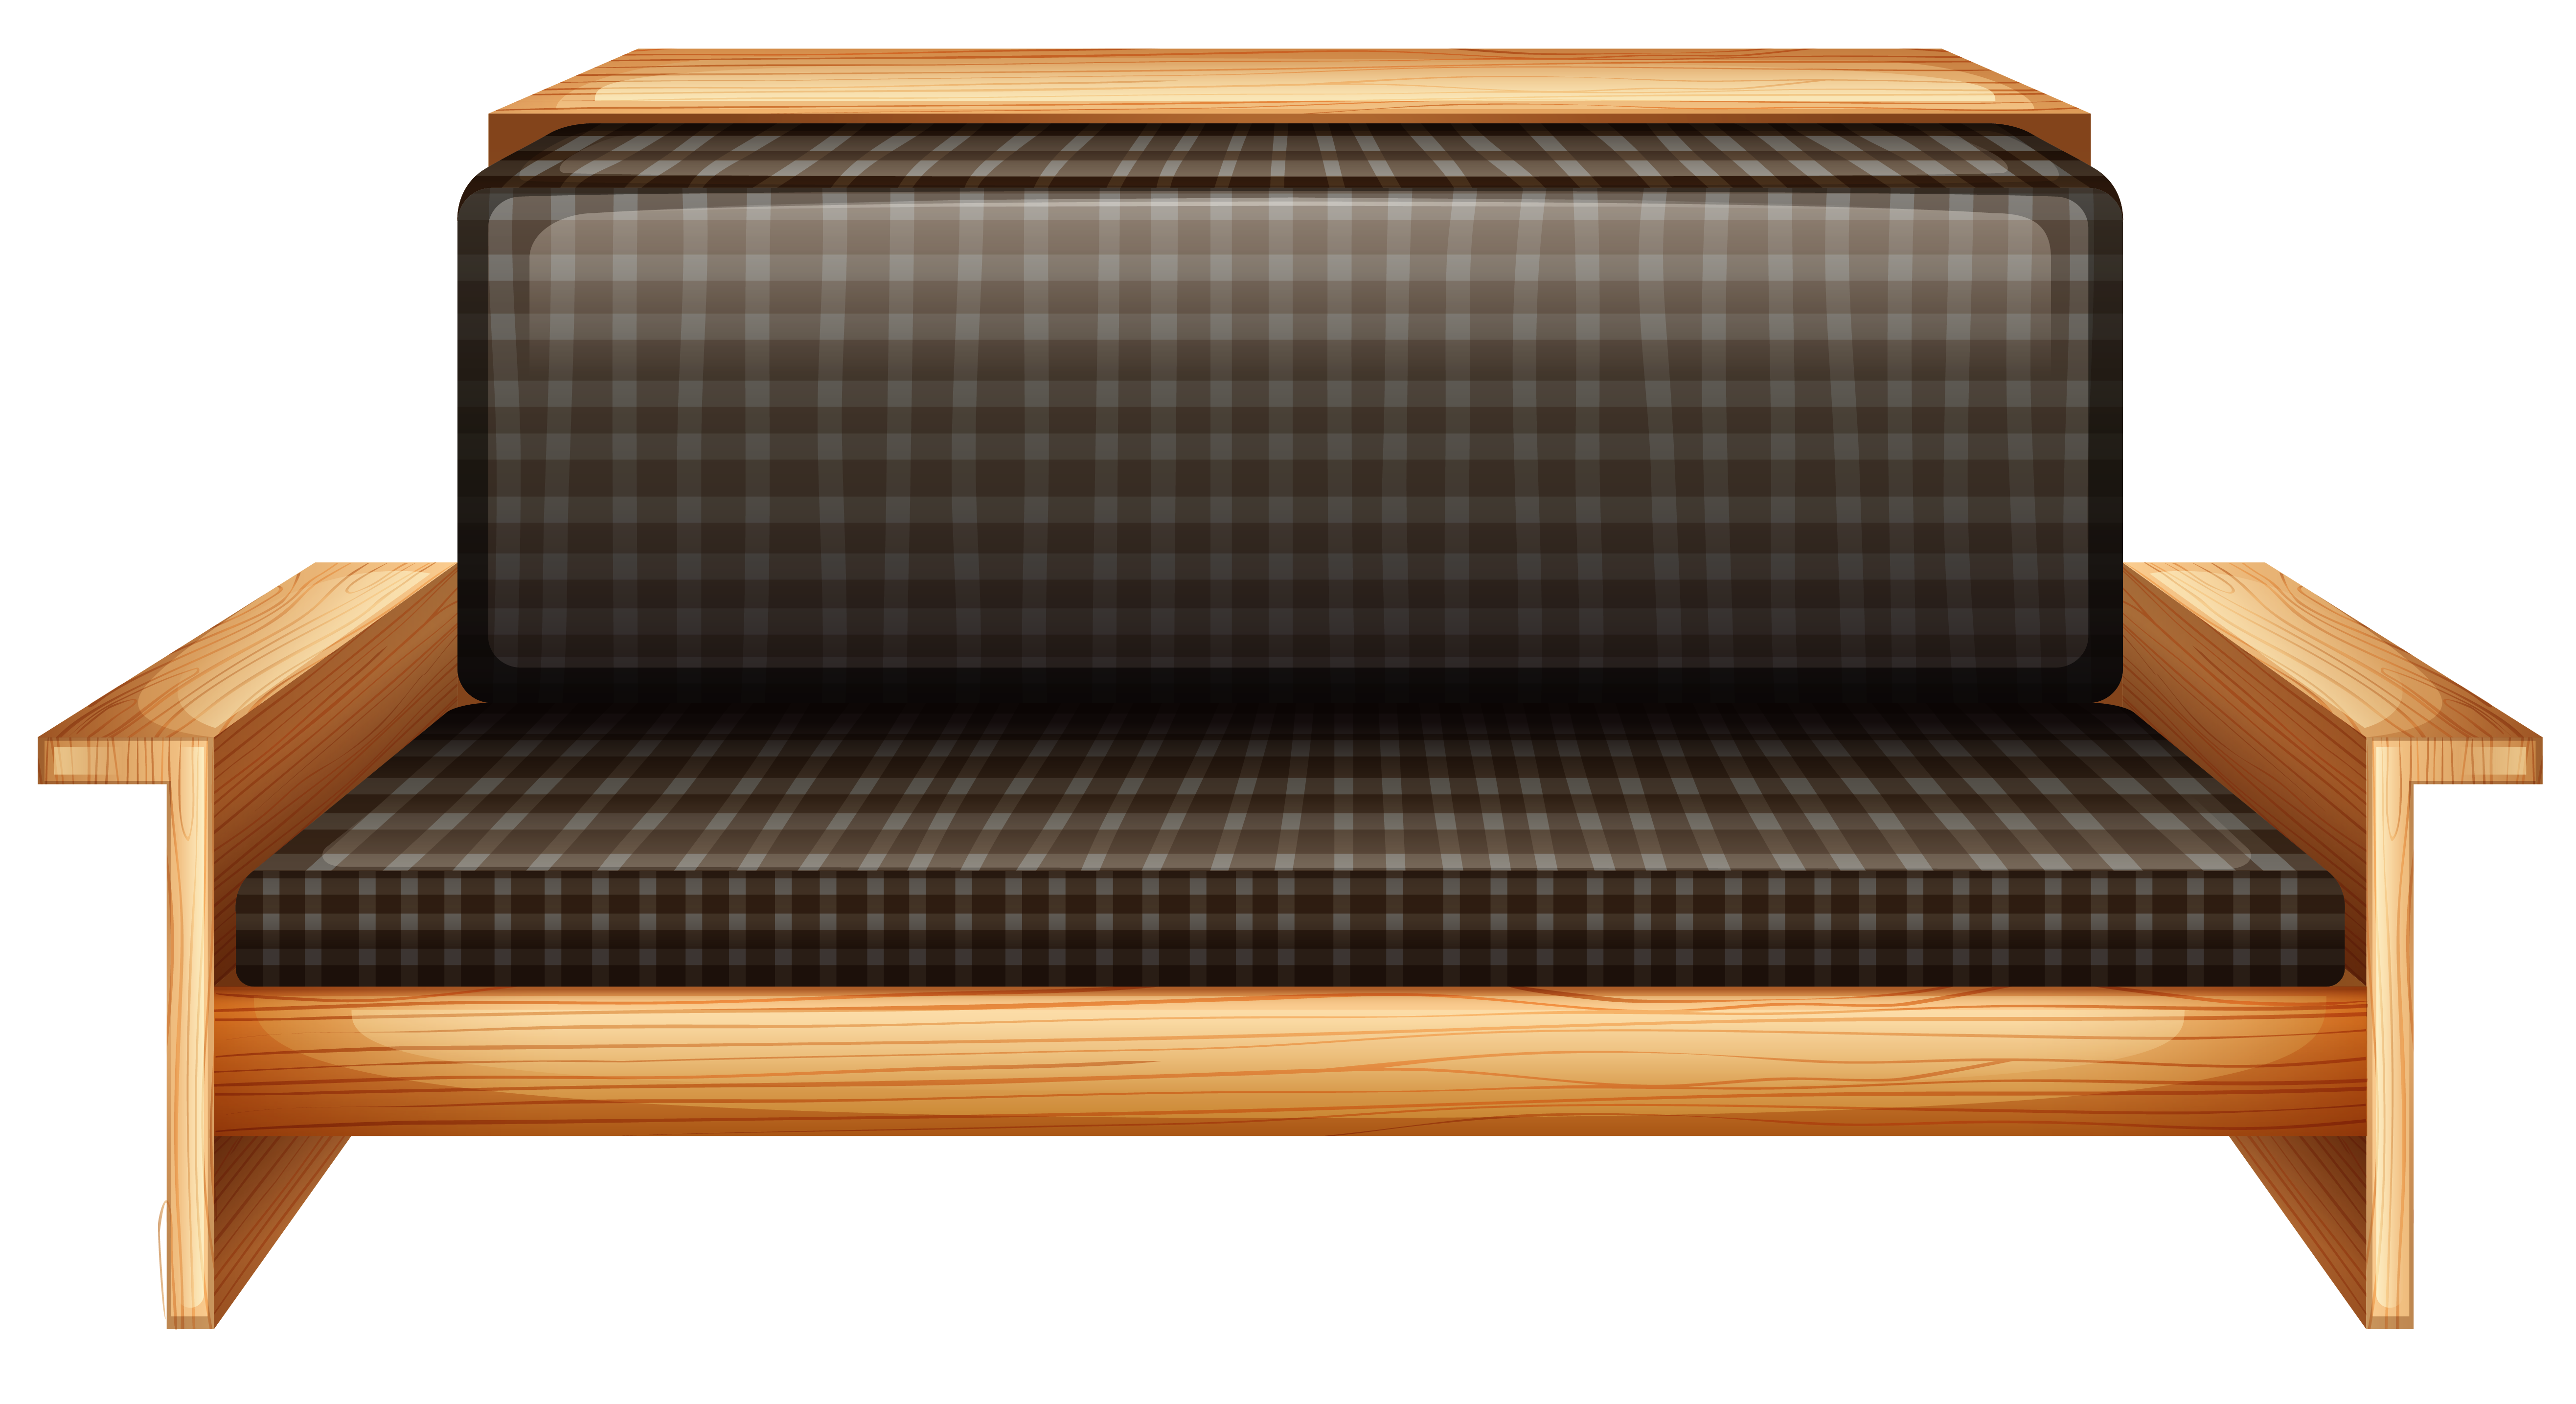 Sofa png image gallery. Couch clipart living room furniture